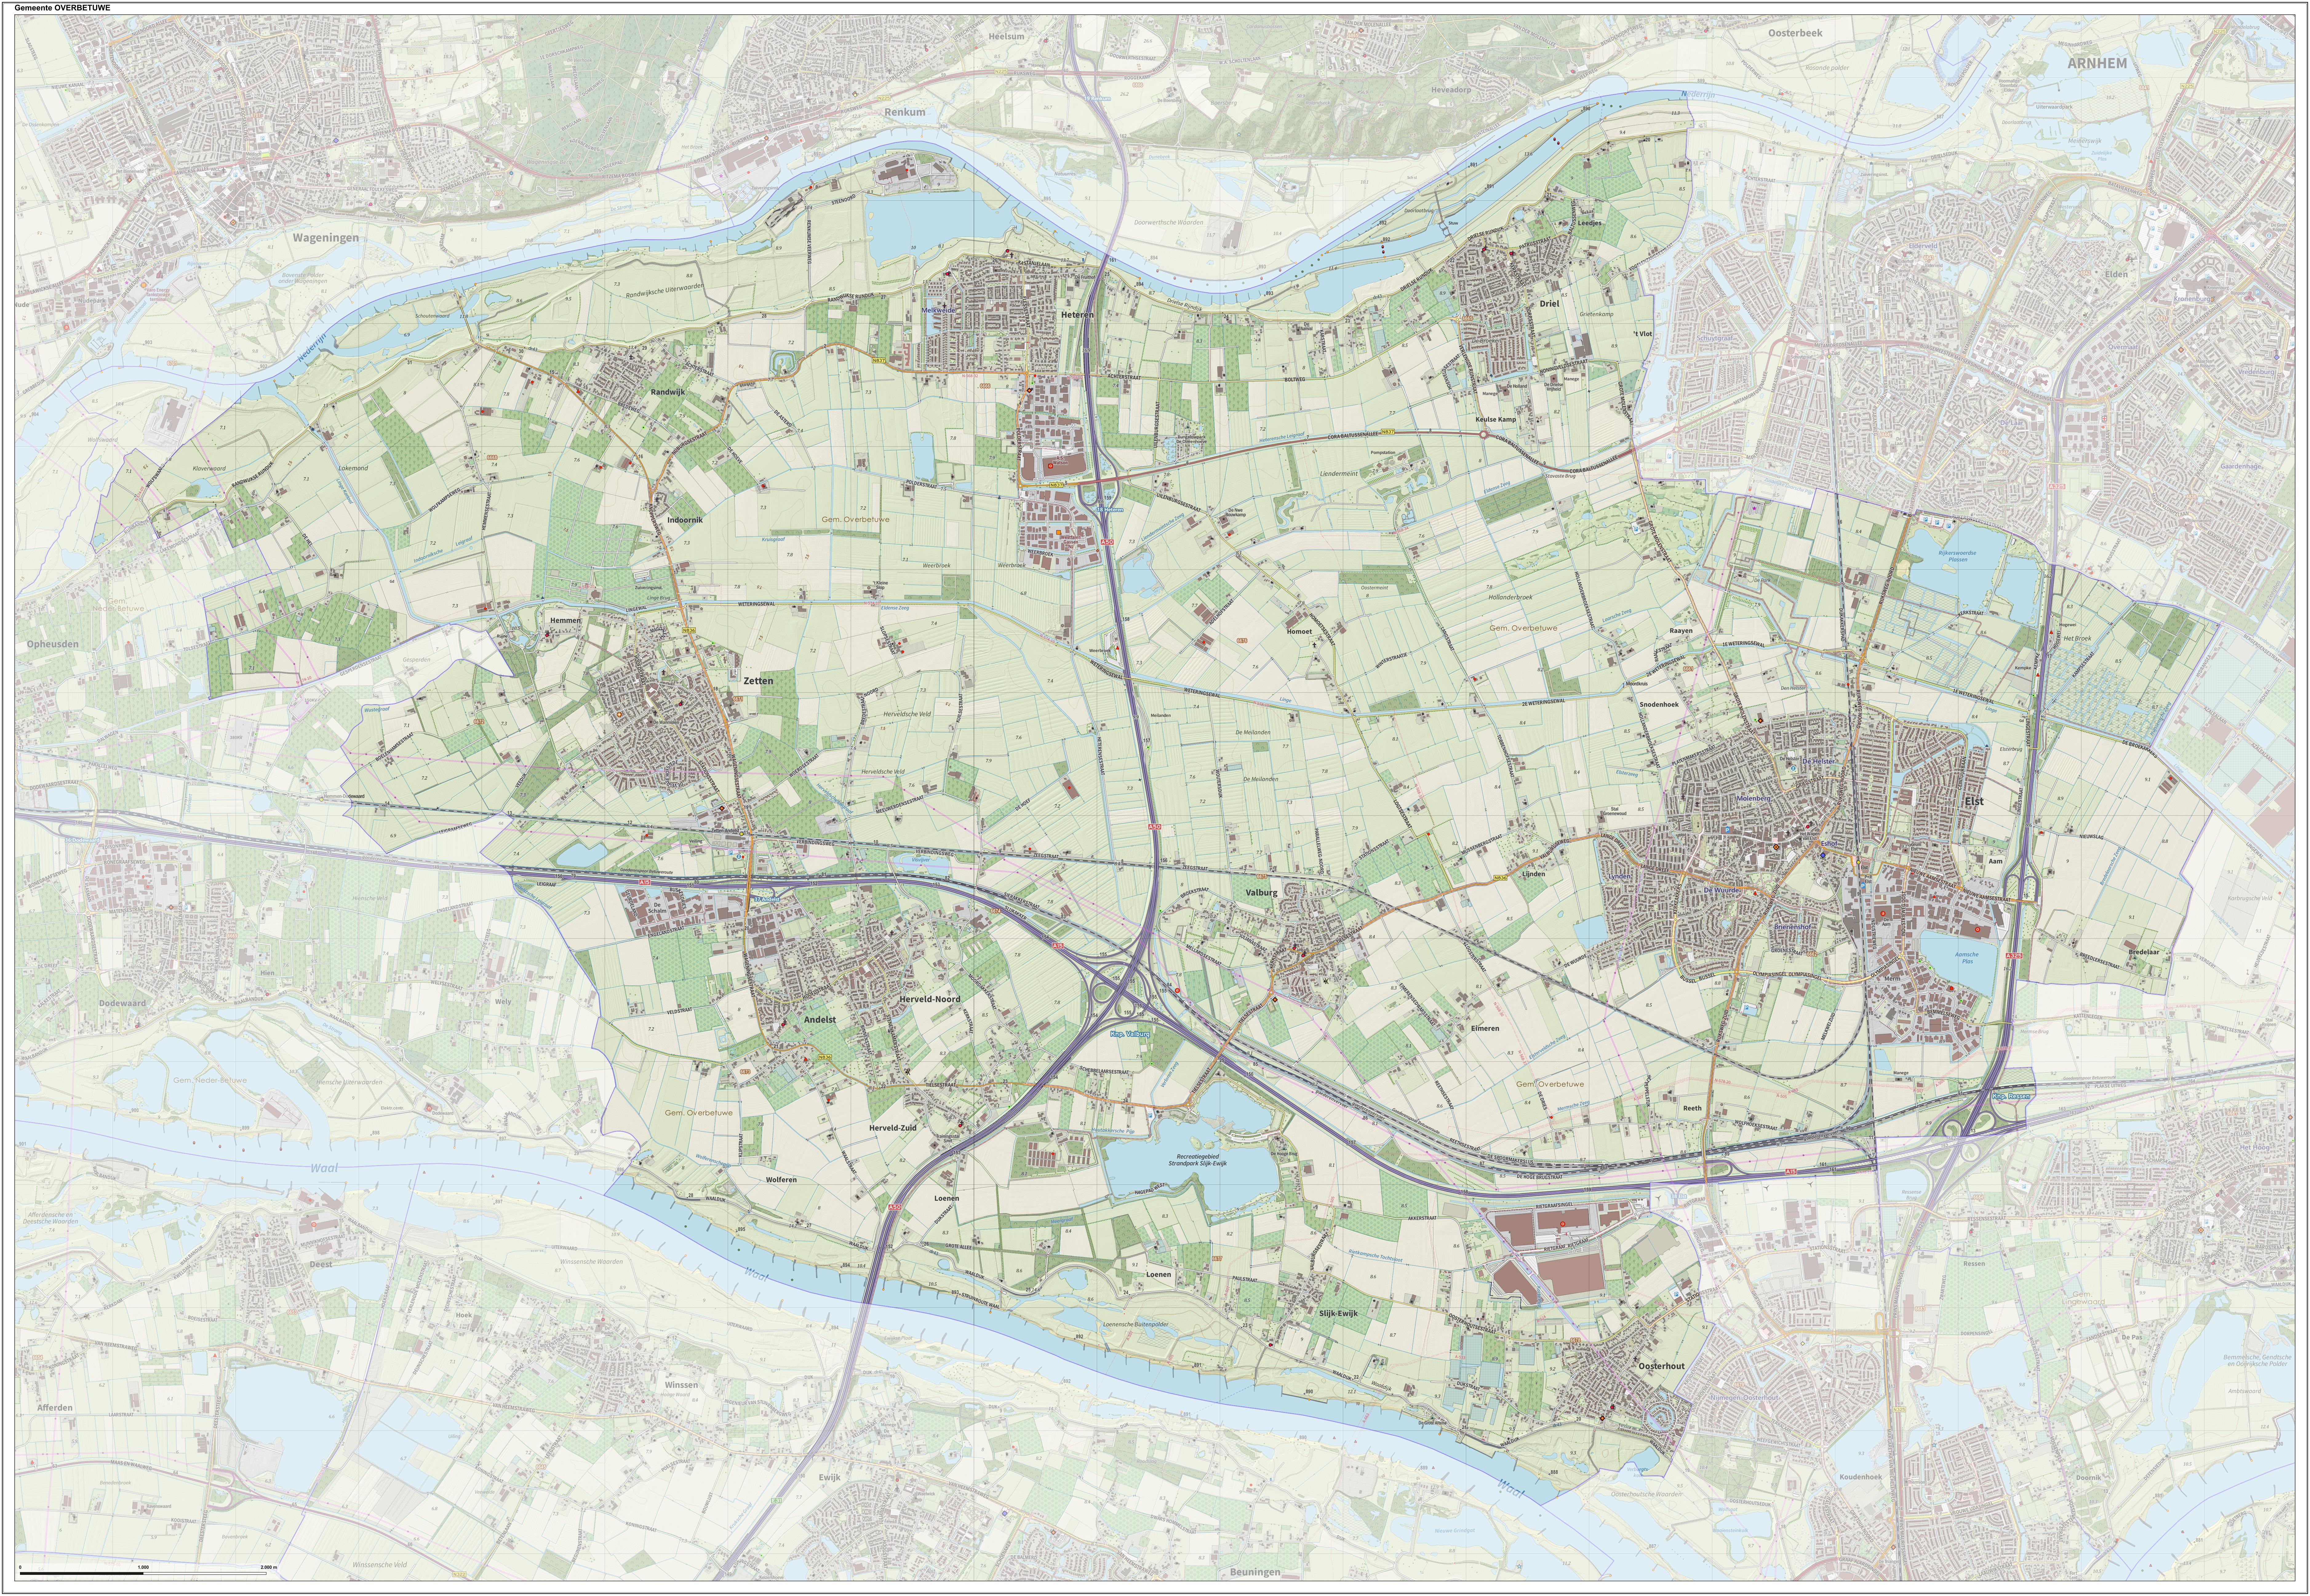 Dutch Topographic map of the municipality of Overbetuwe, June 2015